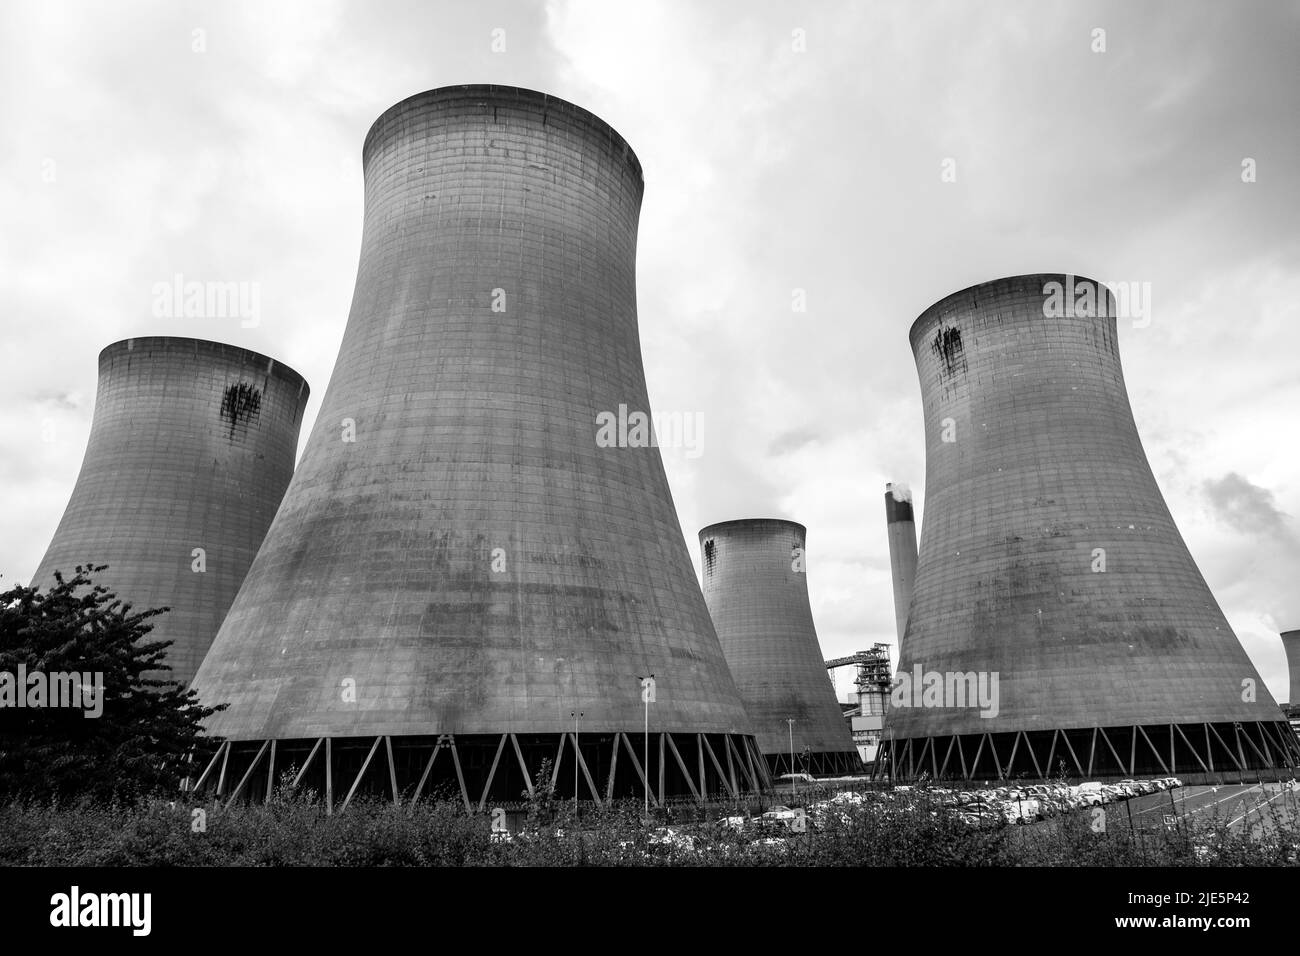 Drax Cooling Towers, Drax power station, black and white, power station in North Yorkshire, England, UK. Stock Photo